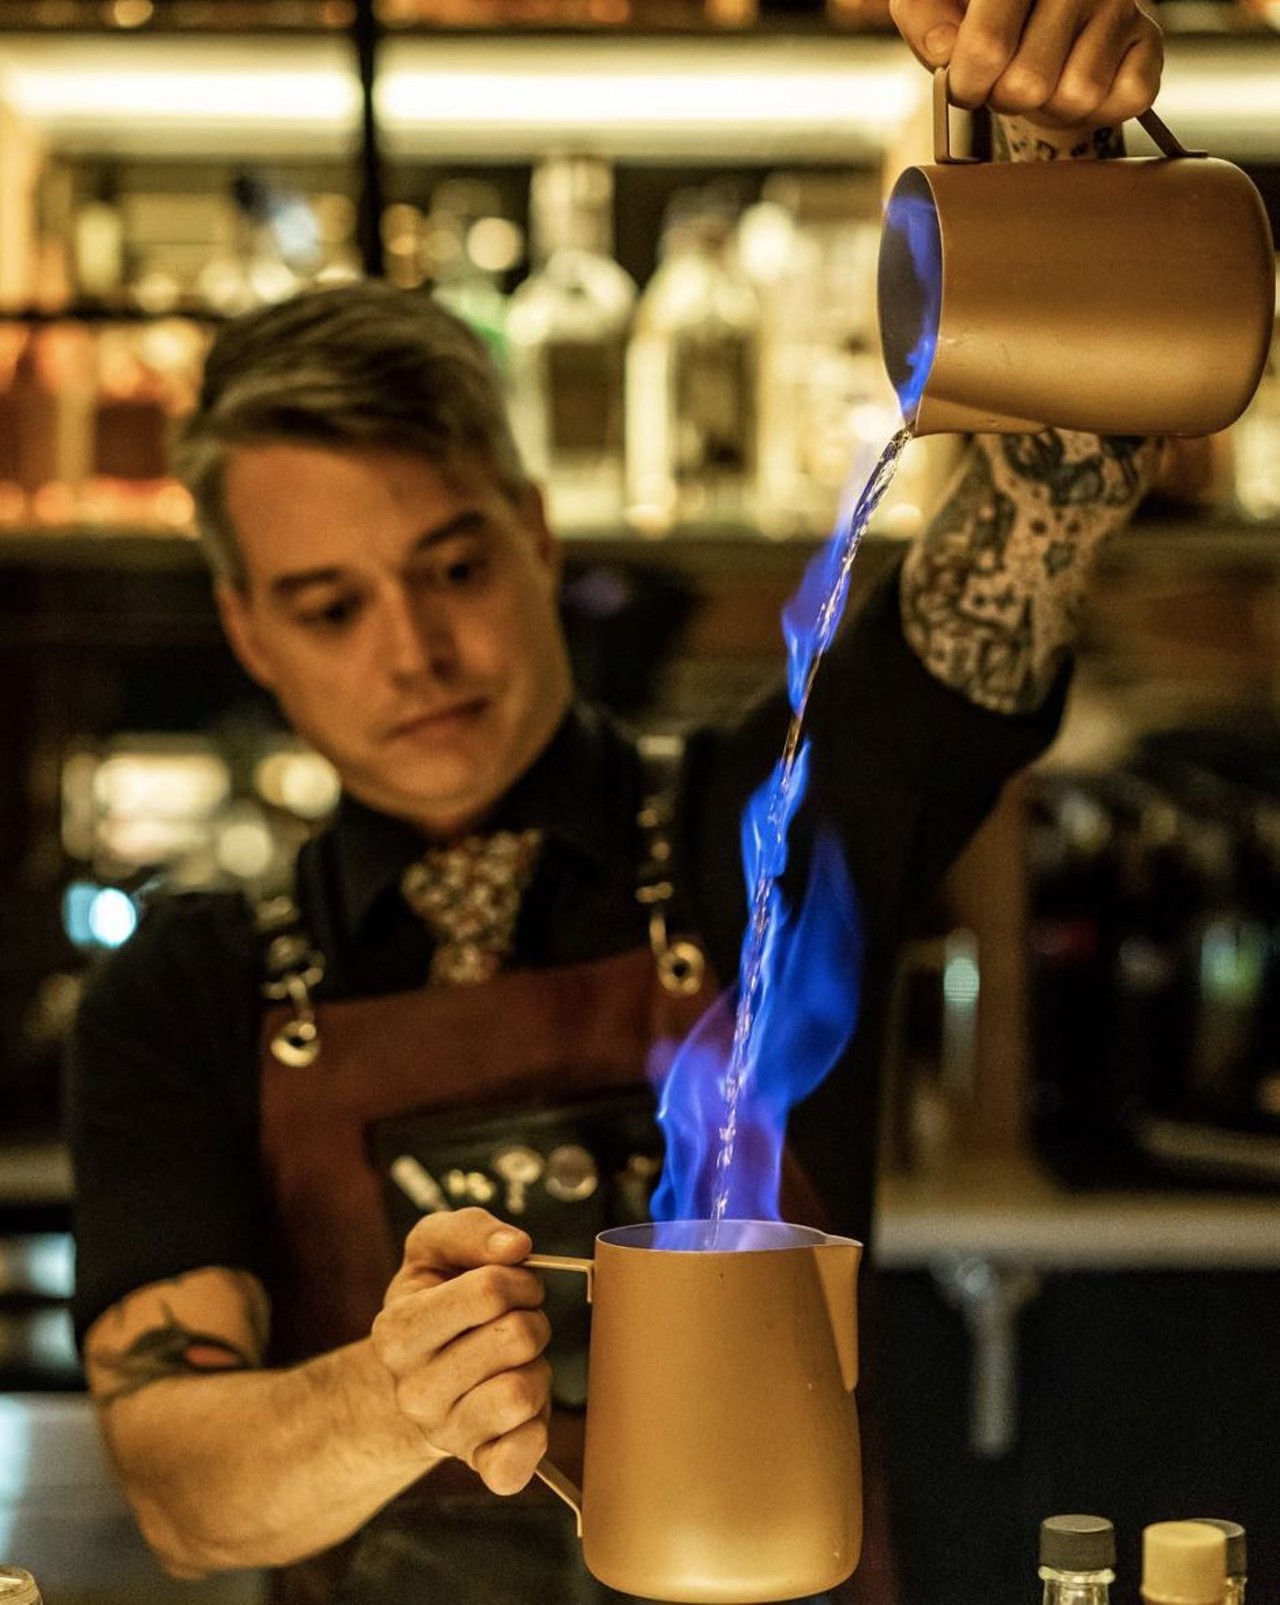 Bad Luck Bar
1218 Griswold St, Detroit, MI 48226
If you&#146;re feeling a little bad, head to this hard-to-find speak easy which makes specialty Tarot-card themed cocktails.
Photo courtesy of @badluckbar